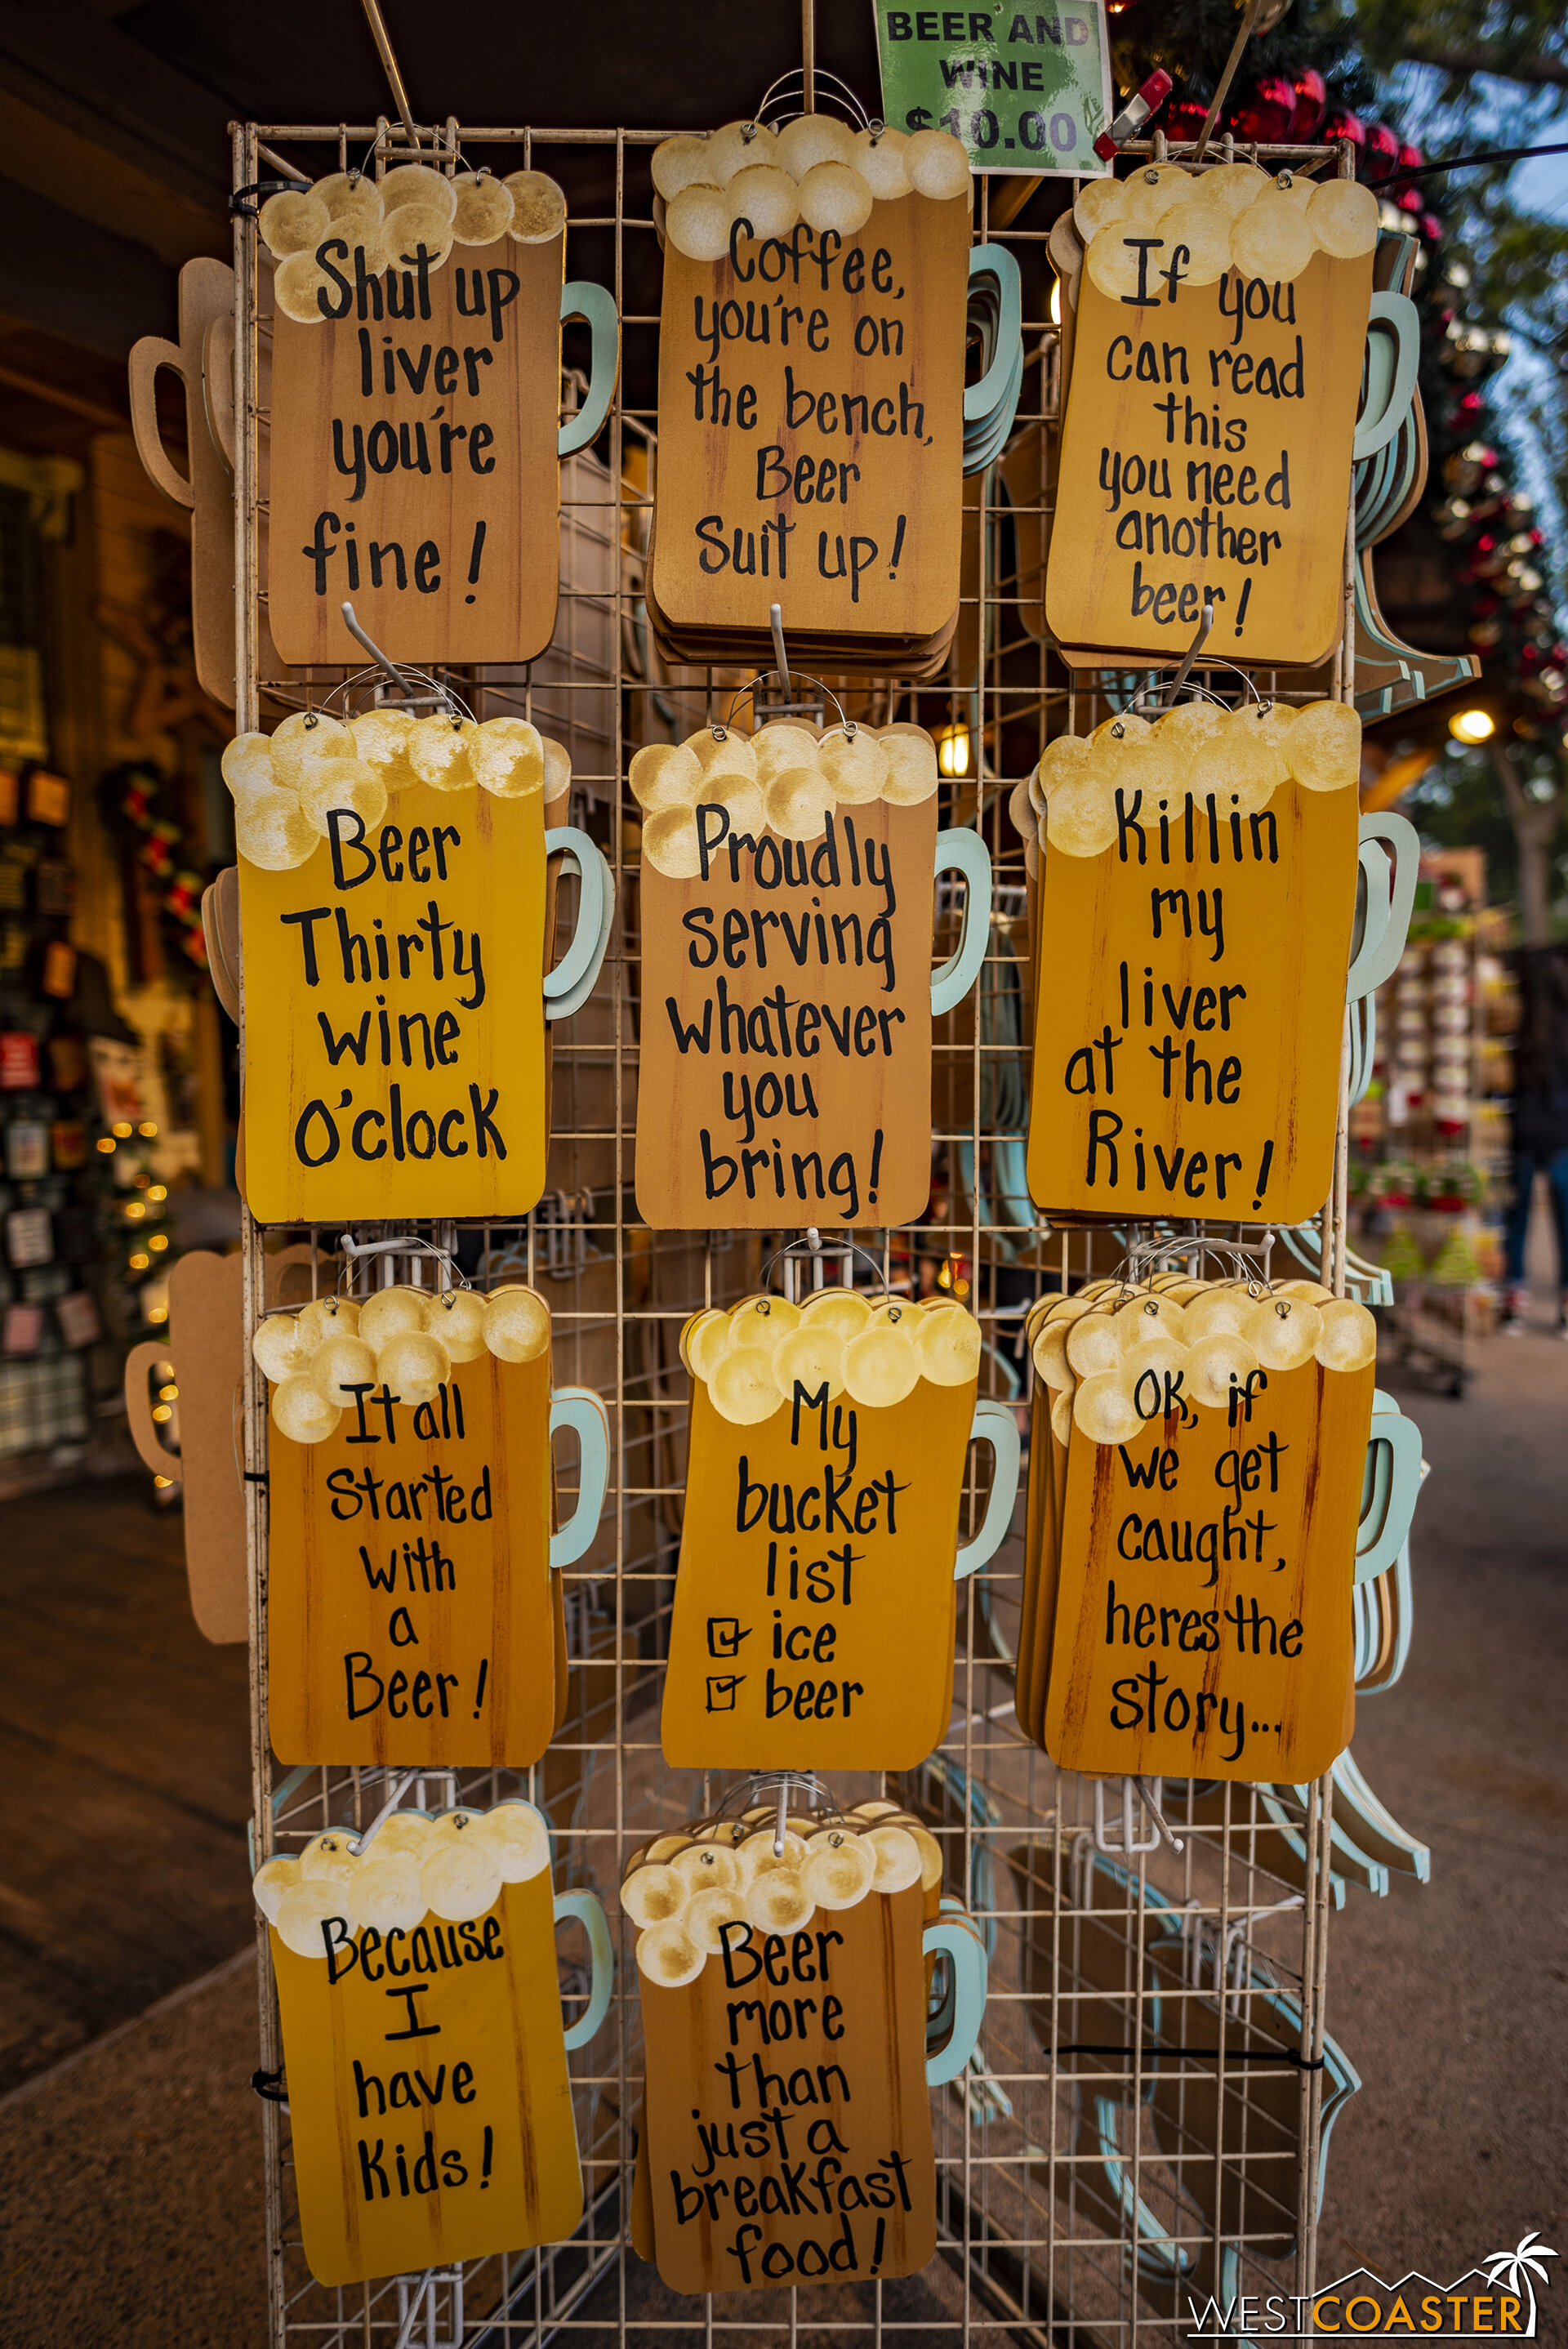  Much of the offerings caters to the homemade / crafty department, with silly, punny mementos and items that definitely show a personalized touch. 